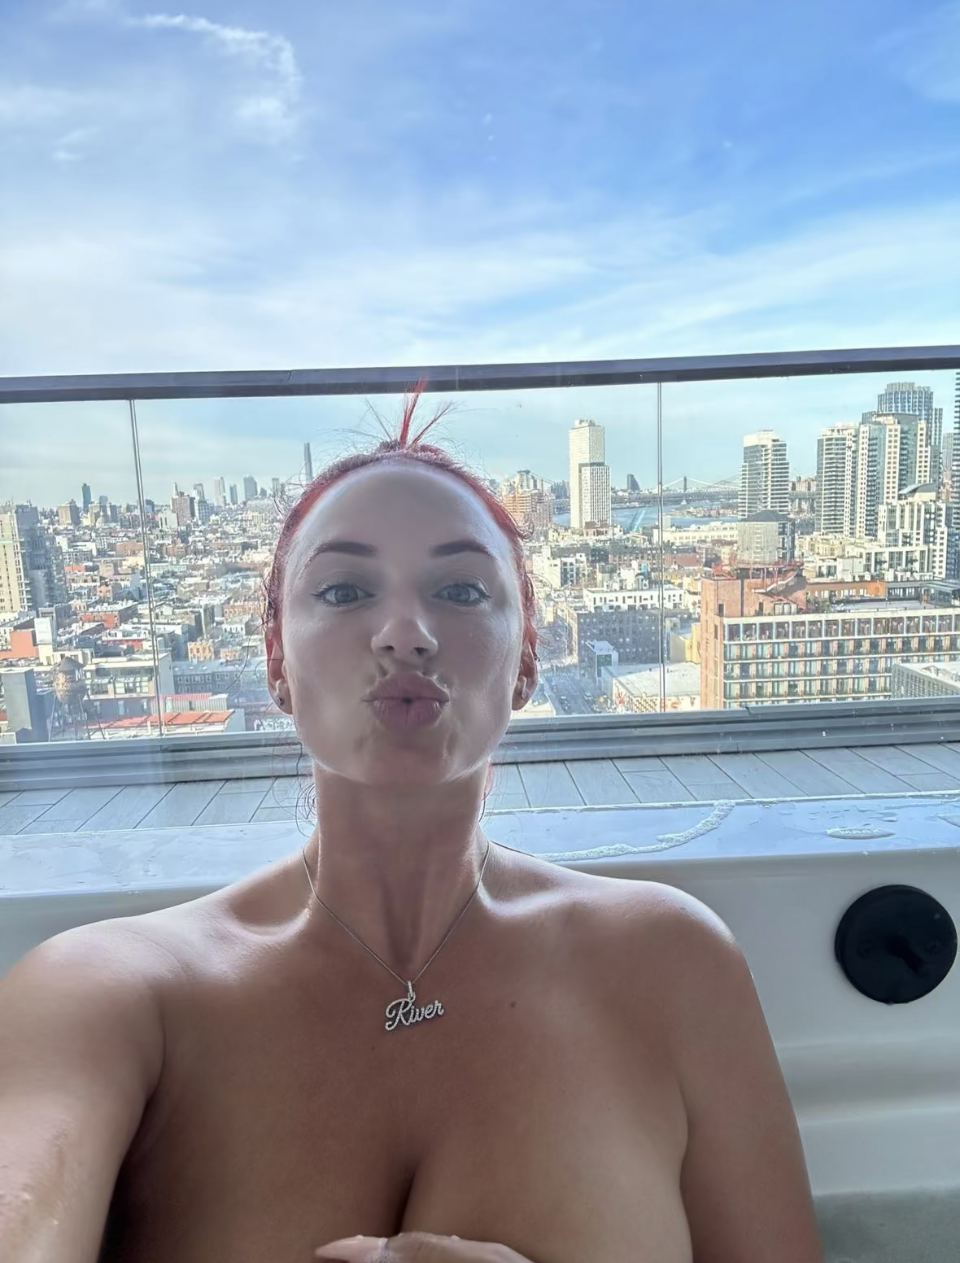 Photos n°5 : Setting the Record Straight: YesJulz Says She Has Never Hooked Up With LeBron James!